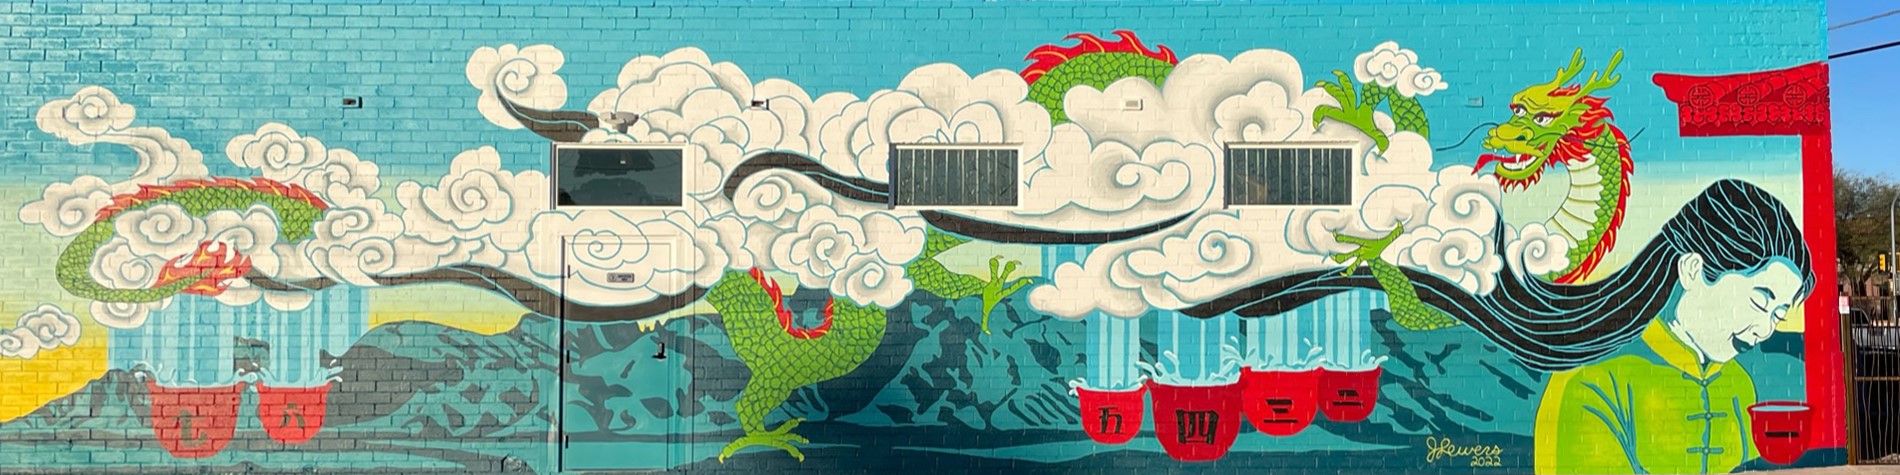 A mural depicting Zhuping Hodge with a green dragon